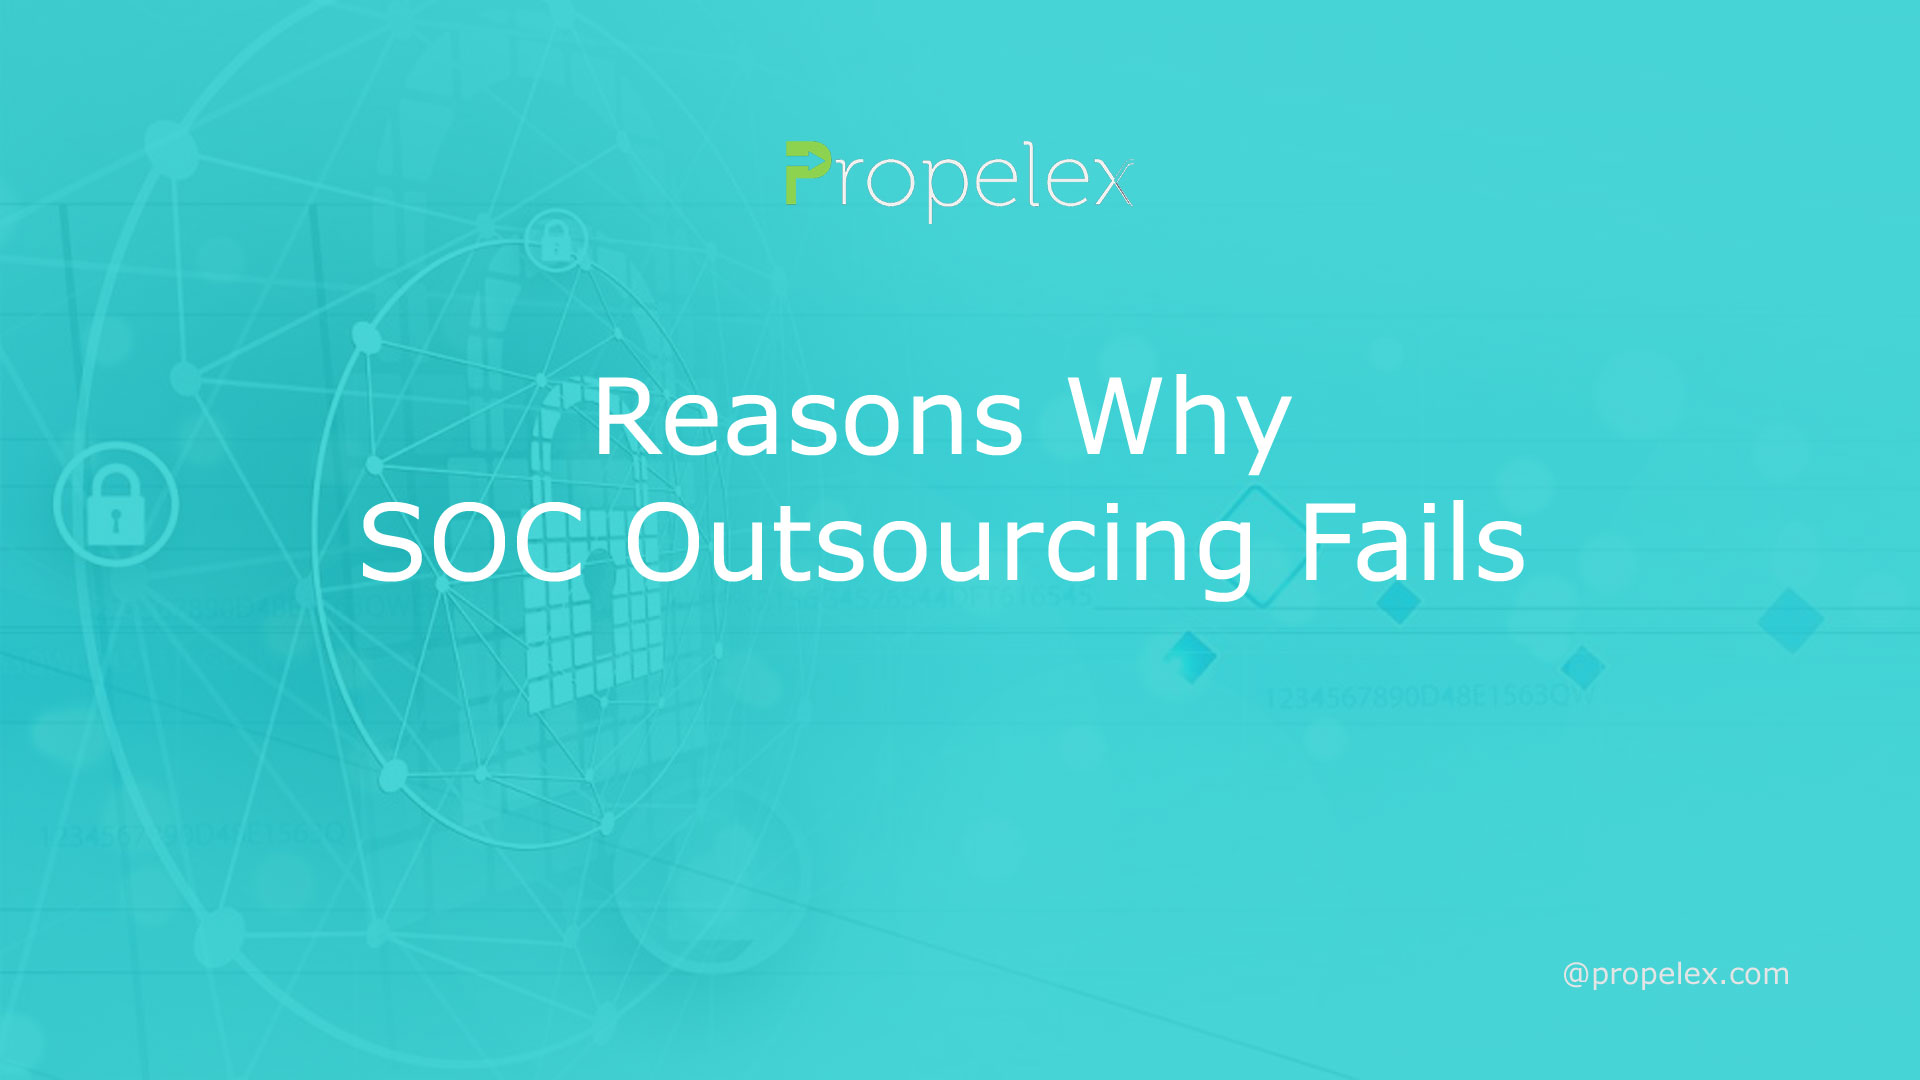 Reasons Why SOC Outsourcing Fails